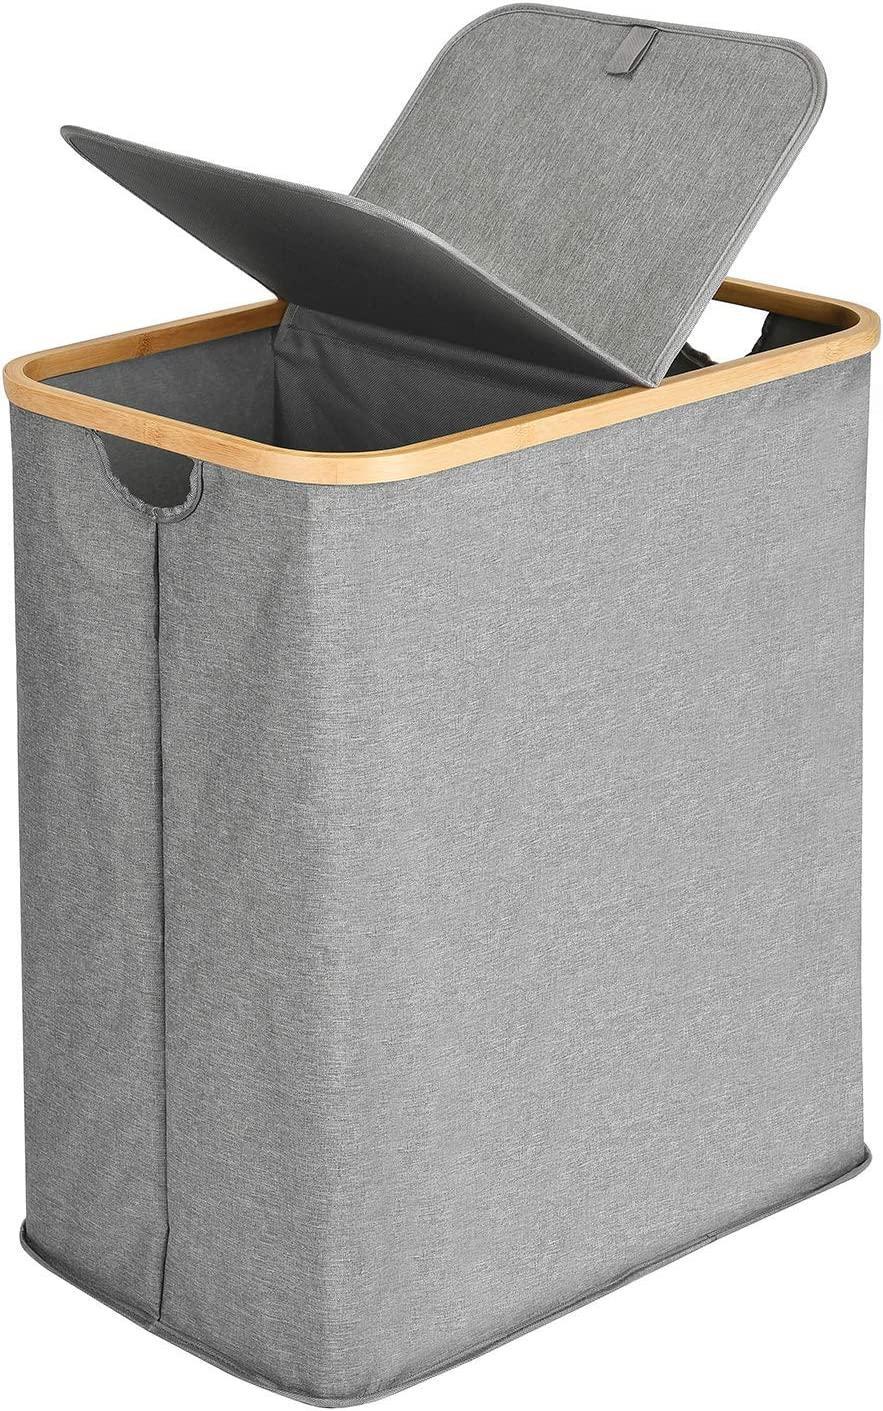 Collapsible Divided Folding Bamboo & Canvas Laundry Hamper with Handles